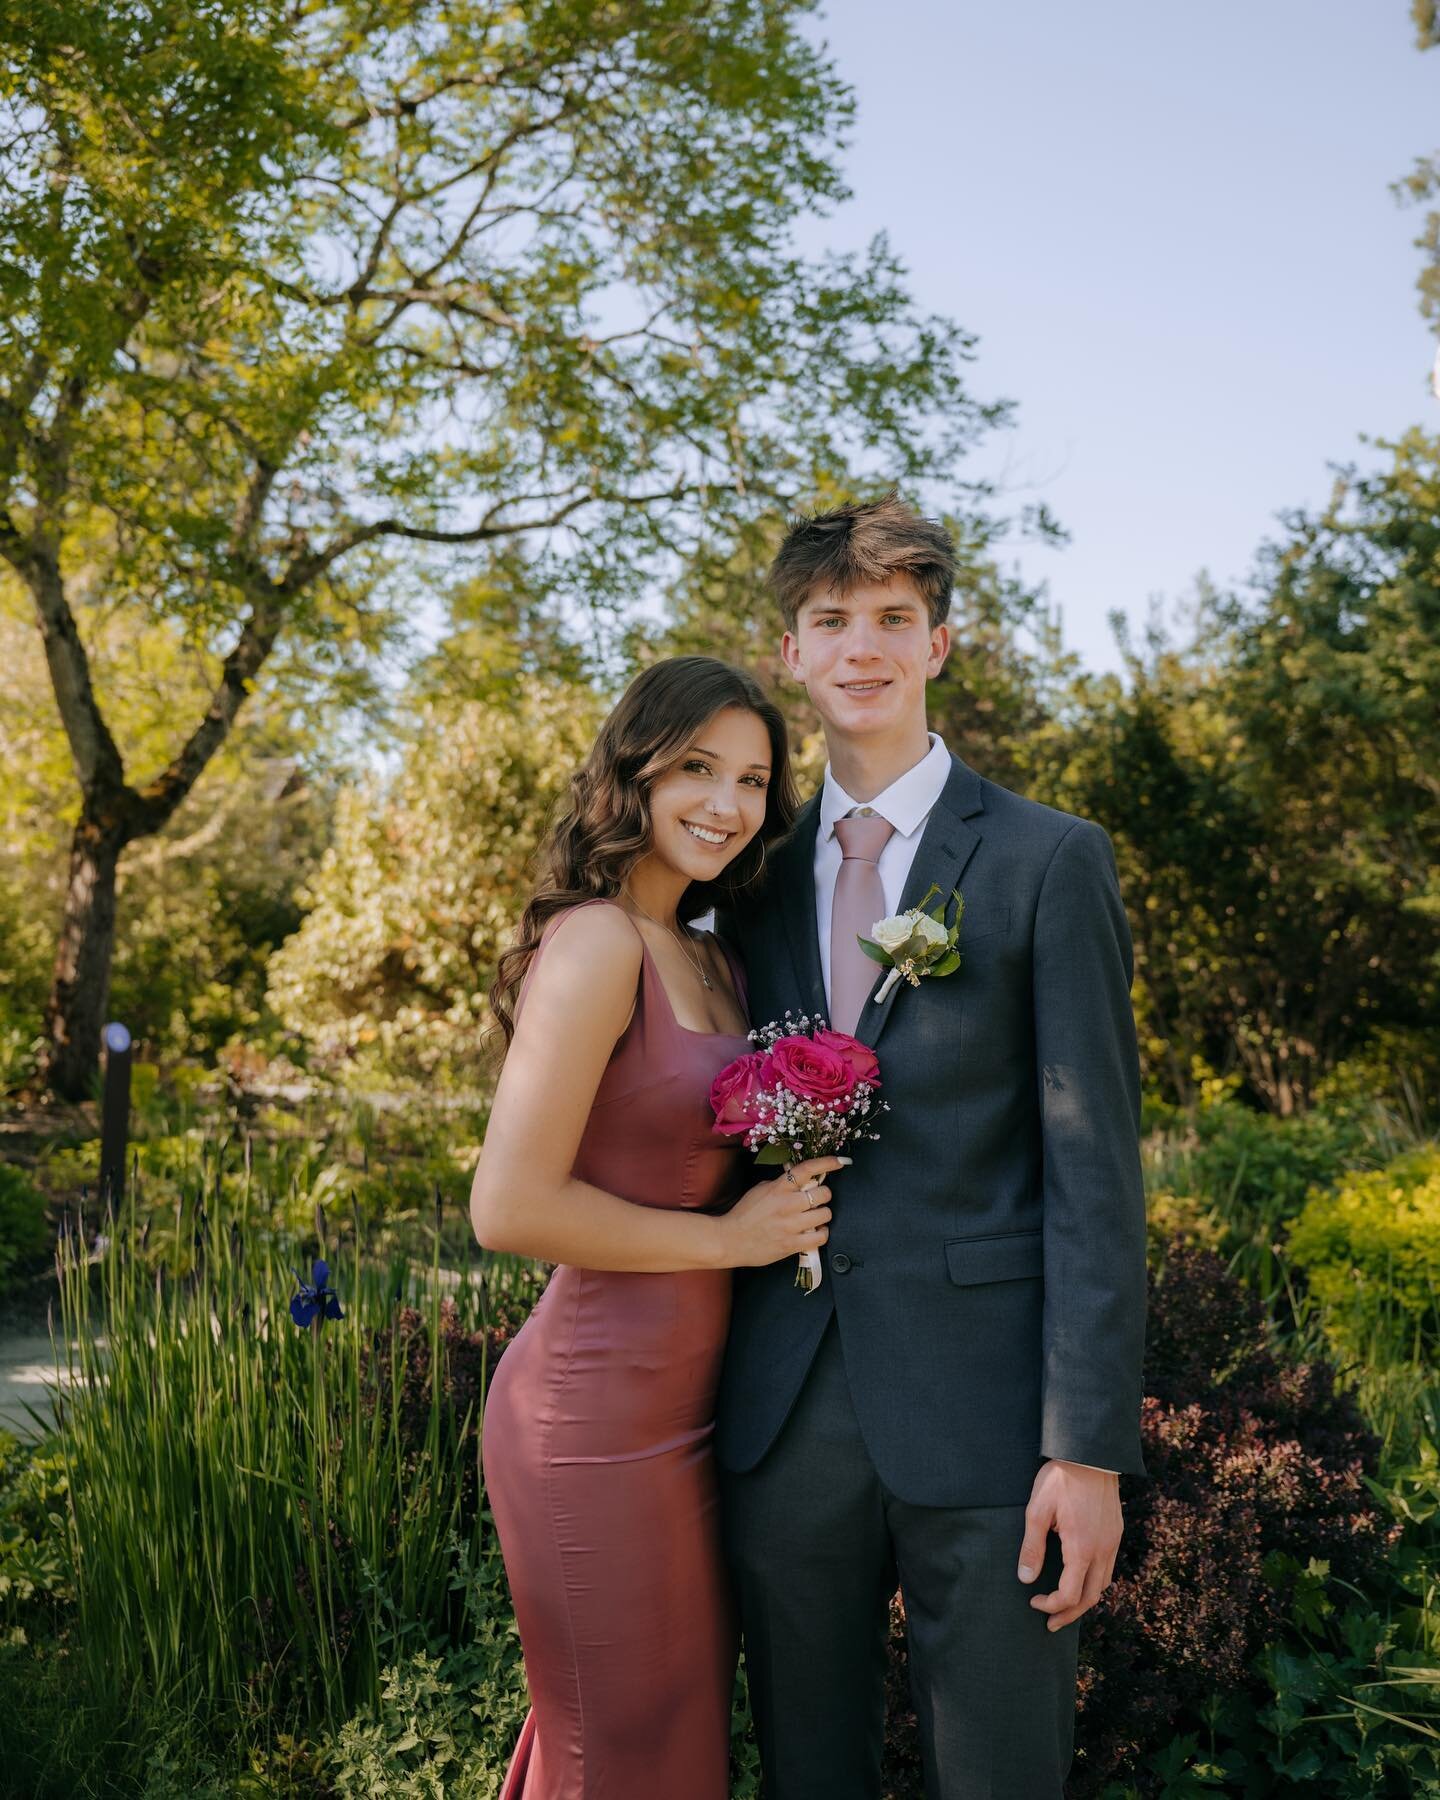 Prom 🥹🥰🔥
Crazy that this is our very last high school experience before graduation next month, and then in three months, we&rsquo;re empty nesters 😳 Time really is a thief.